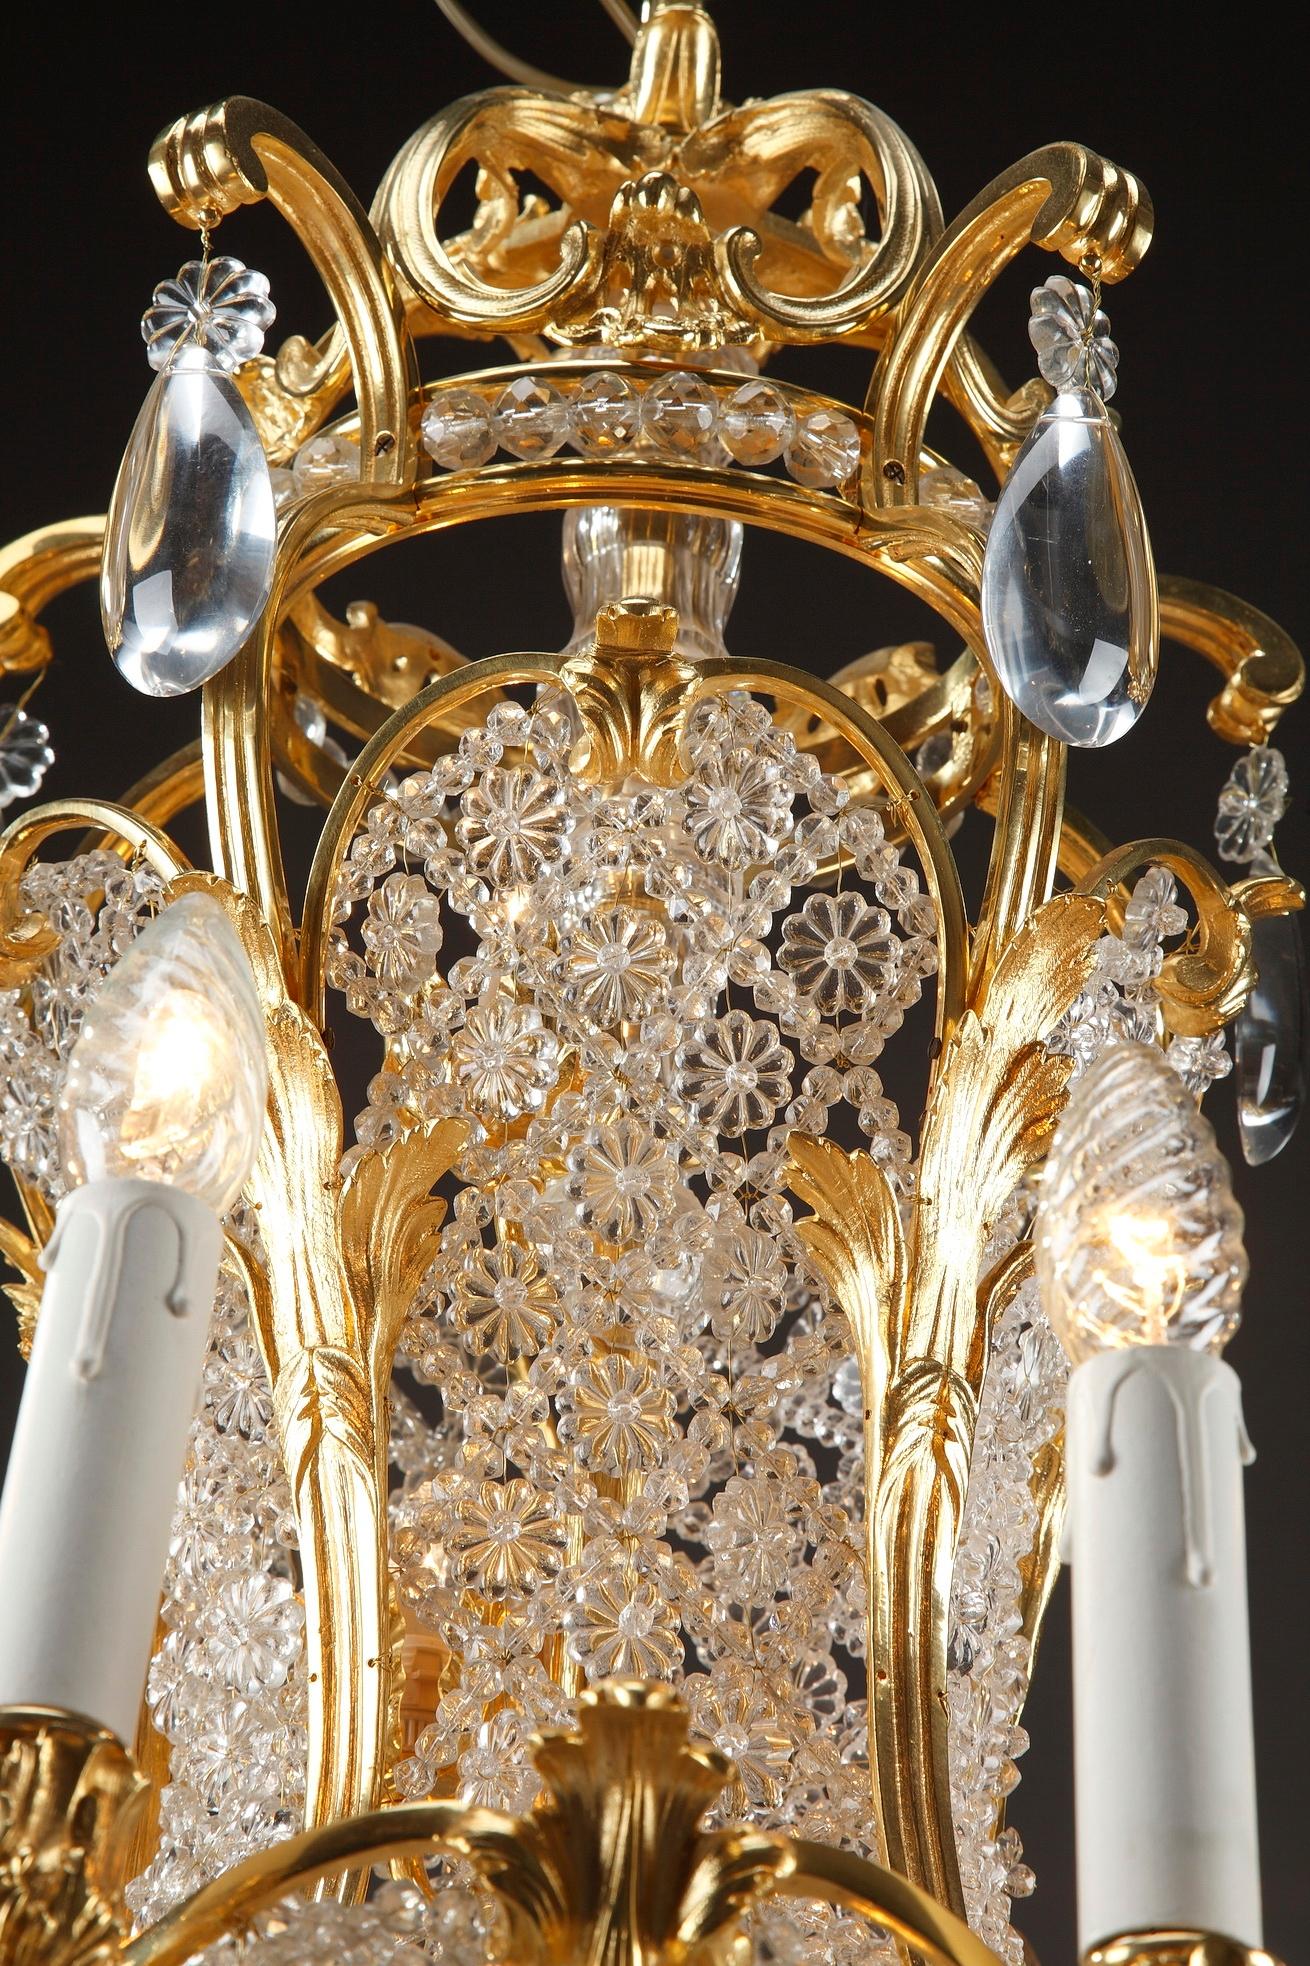 19th Century 10-Light Ormolu and Crystal Basket-Shaped Chandelier For Sale 4